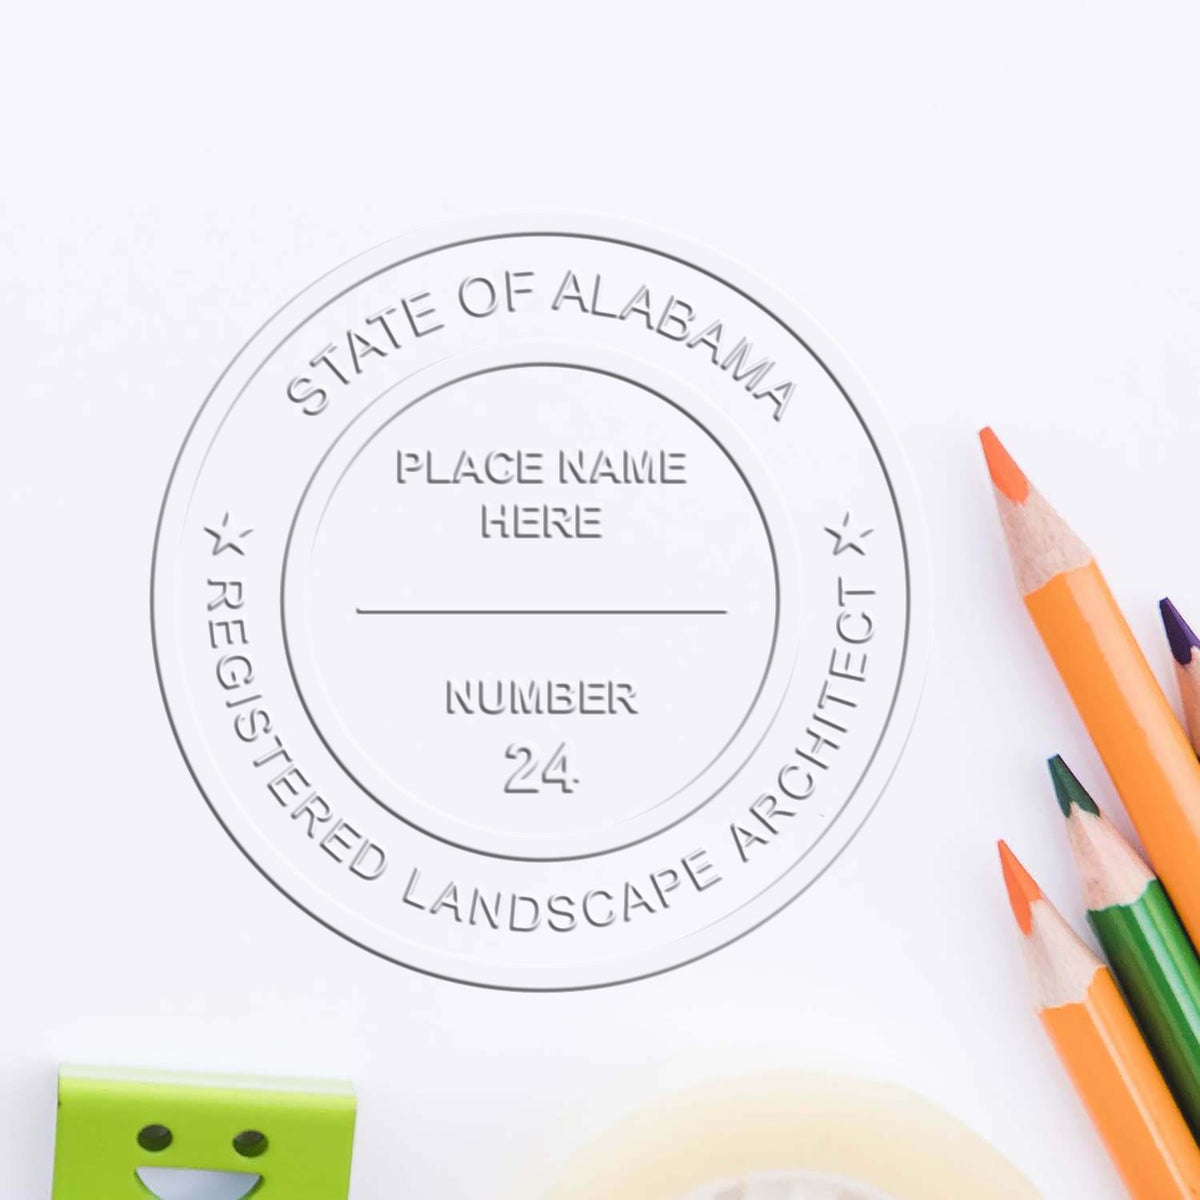 The Gift Alabama Landscape Architect Seal stamp impression comes to life with a crisp, detailed image stamped on paper - showcasing true professional quality.